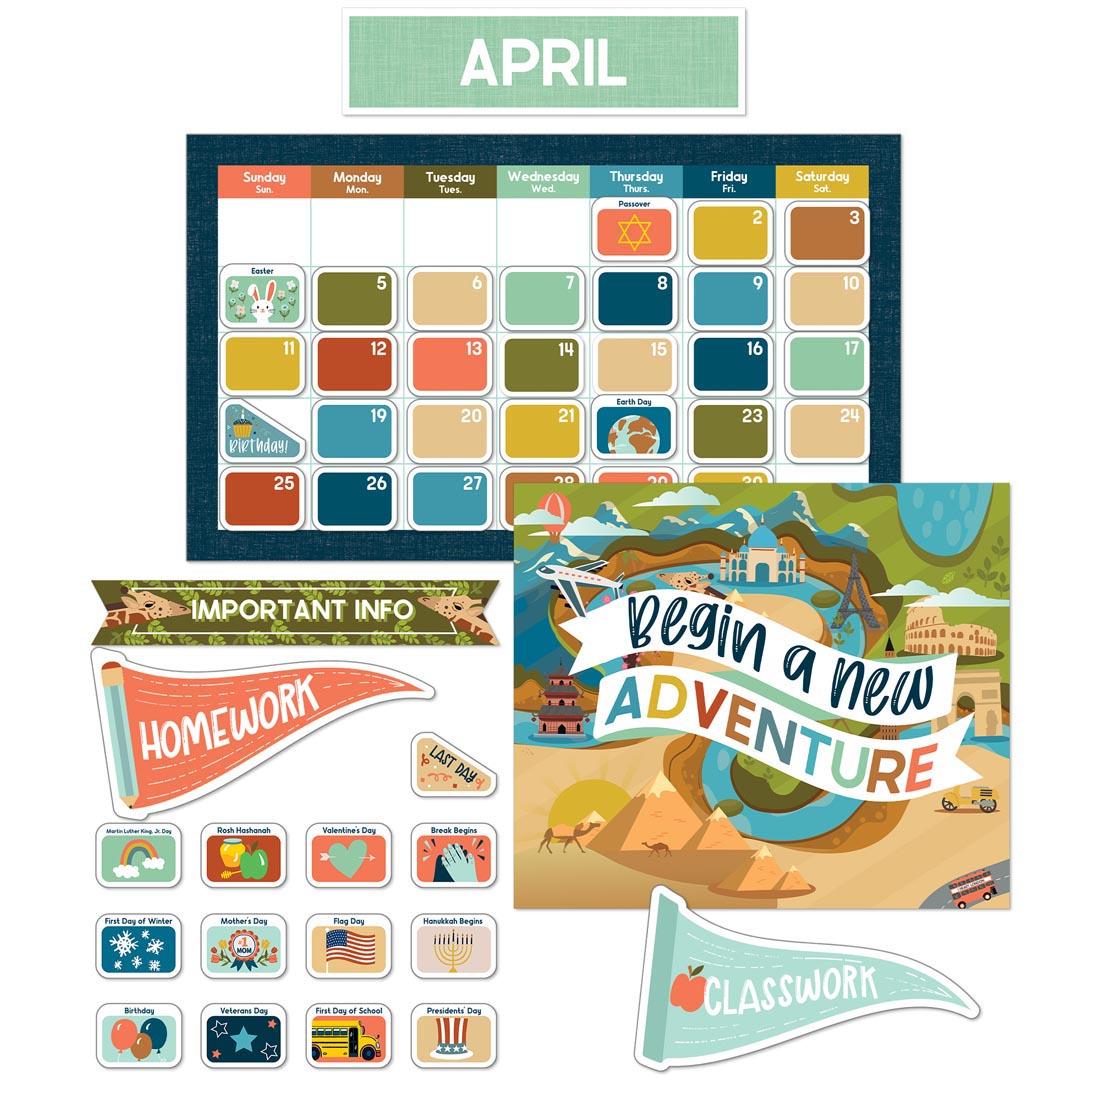 Main components of Let's Explore Calendar Bulletin Board Set By Carson Dellosa, including calendar grid and accents